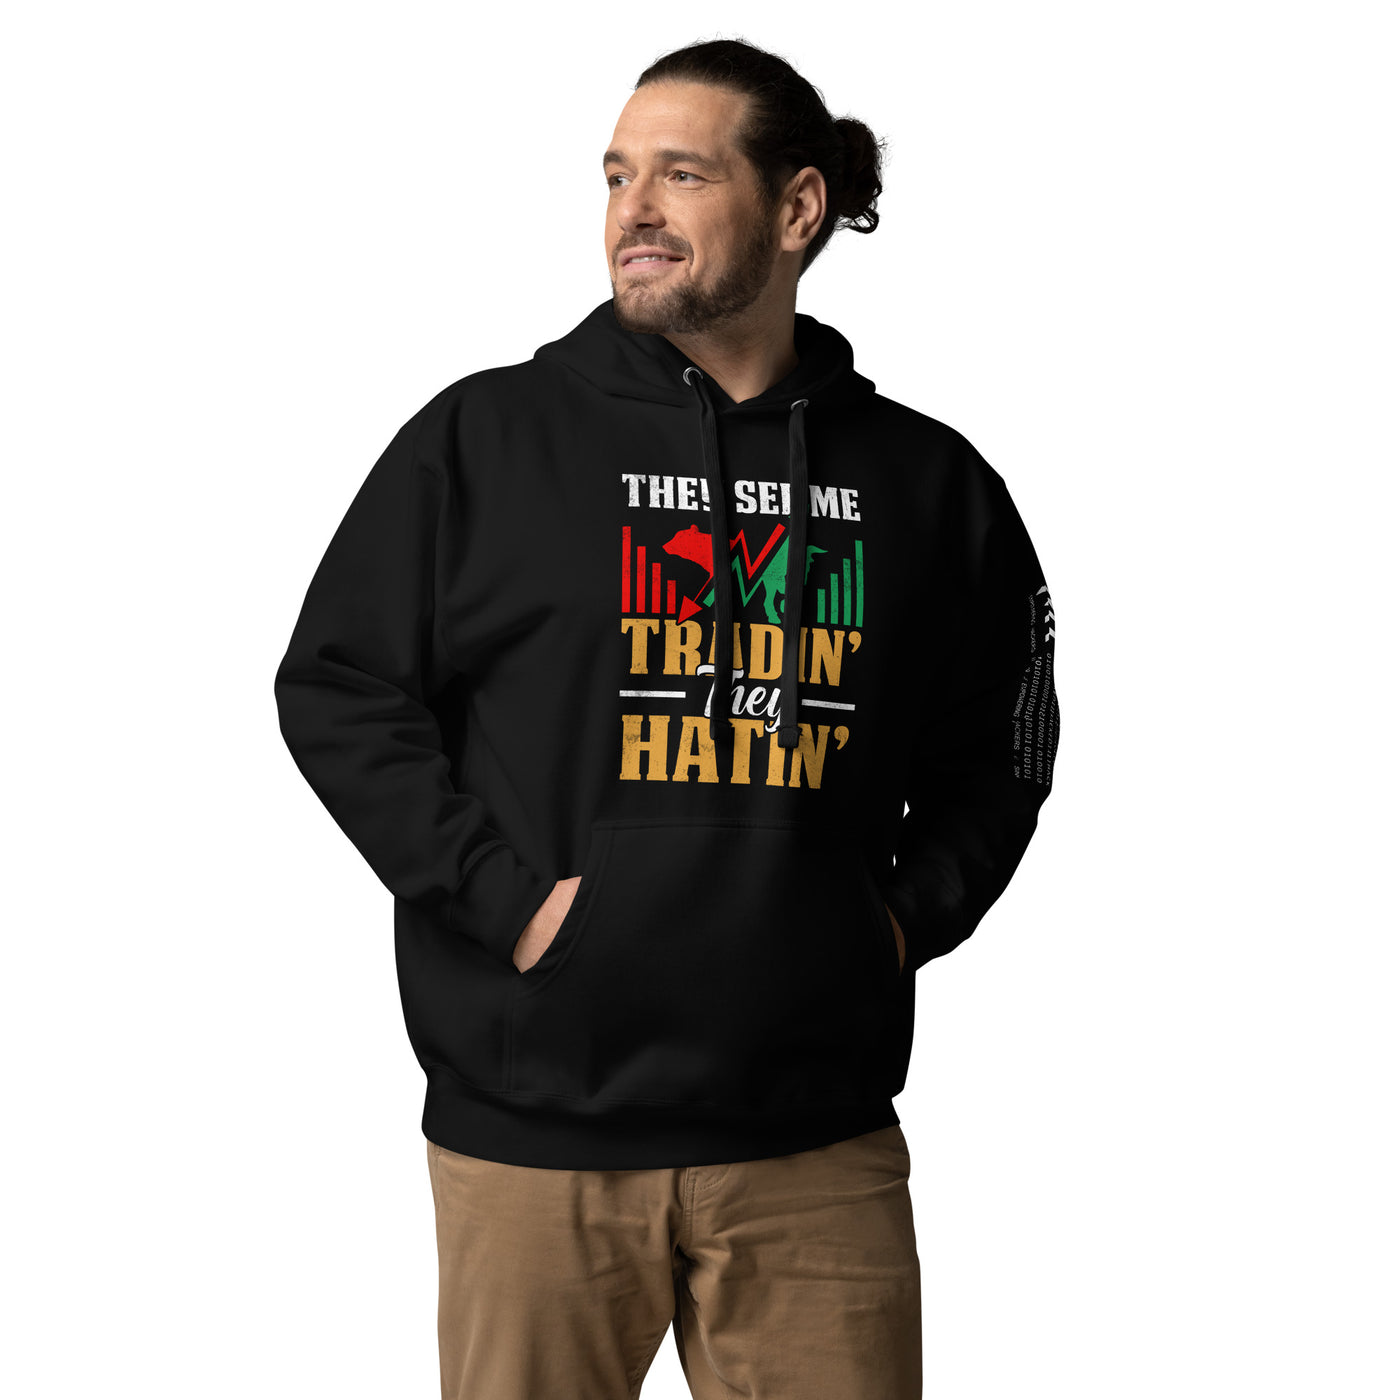 They See me Trading, they Hating -  Unisex Hoodie